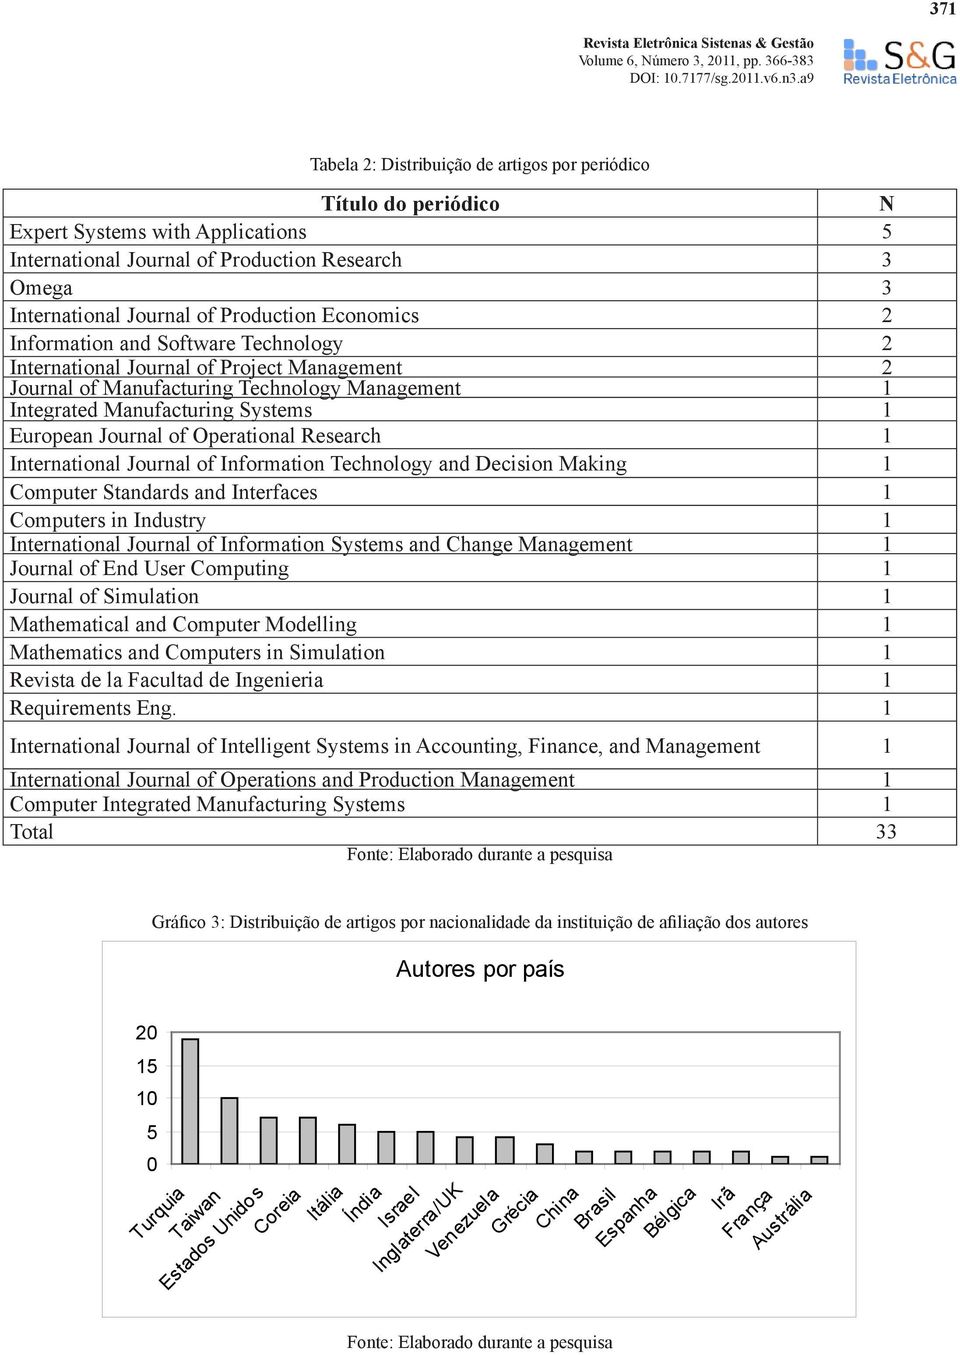 Technology and Decision Making 1 Computer Standards and Interfaces 1 Computers in Industry 1 Information Systems and Change Management 1 Journal of End User Computing 1 Journal of Simulation 1